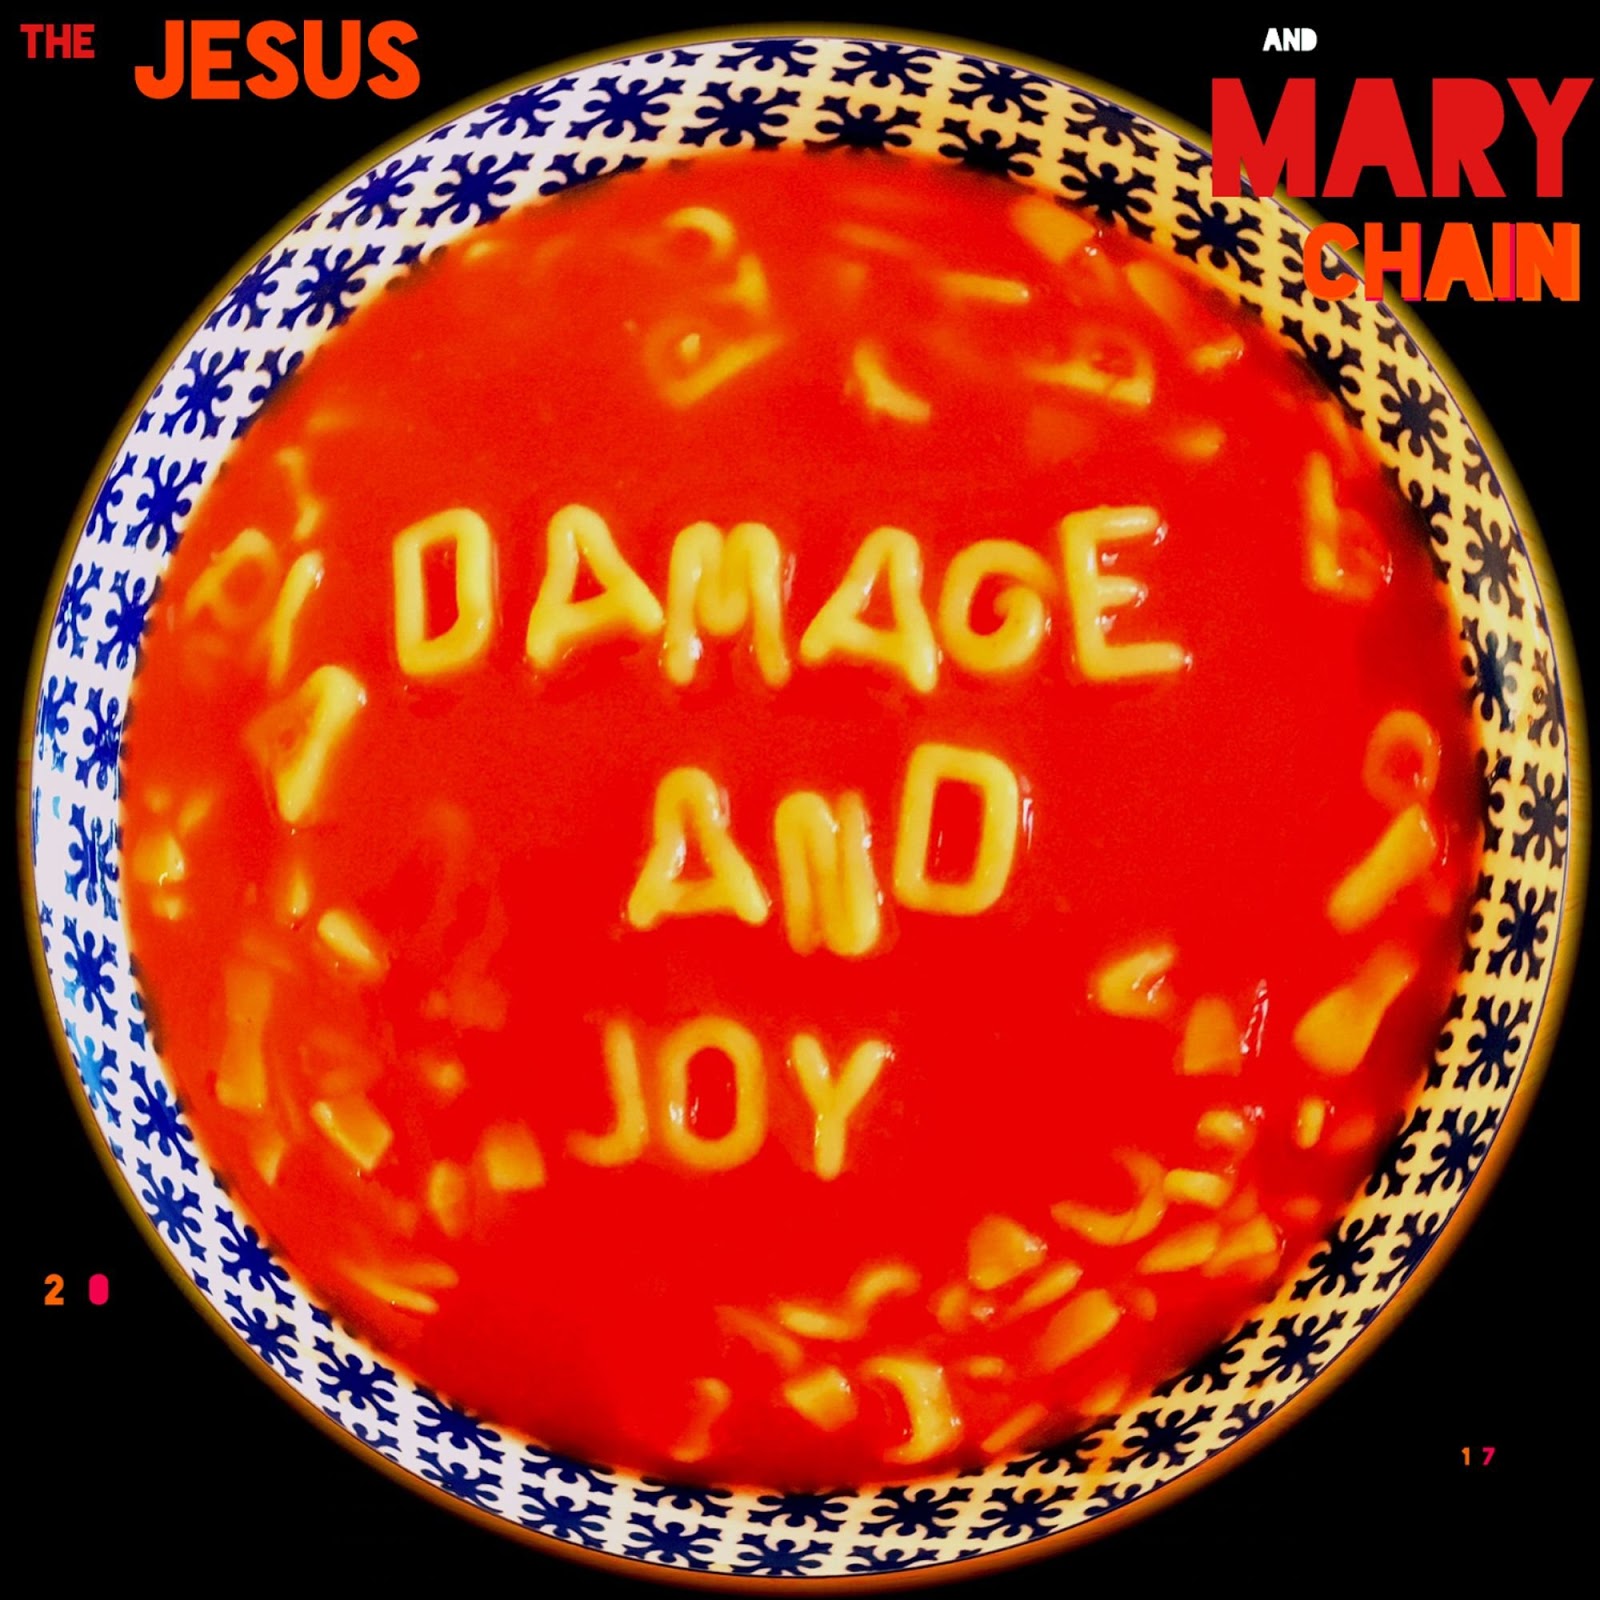 Album Review: The Jesus And Mary Chain - Damage And Joy (Warner) - POEt